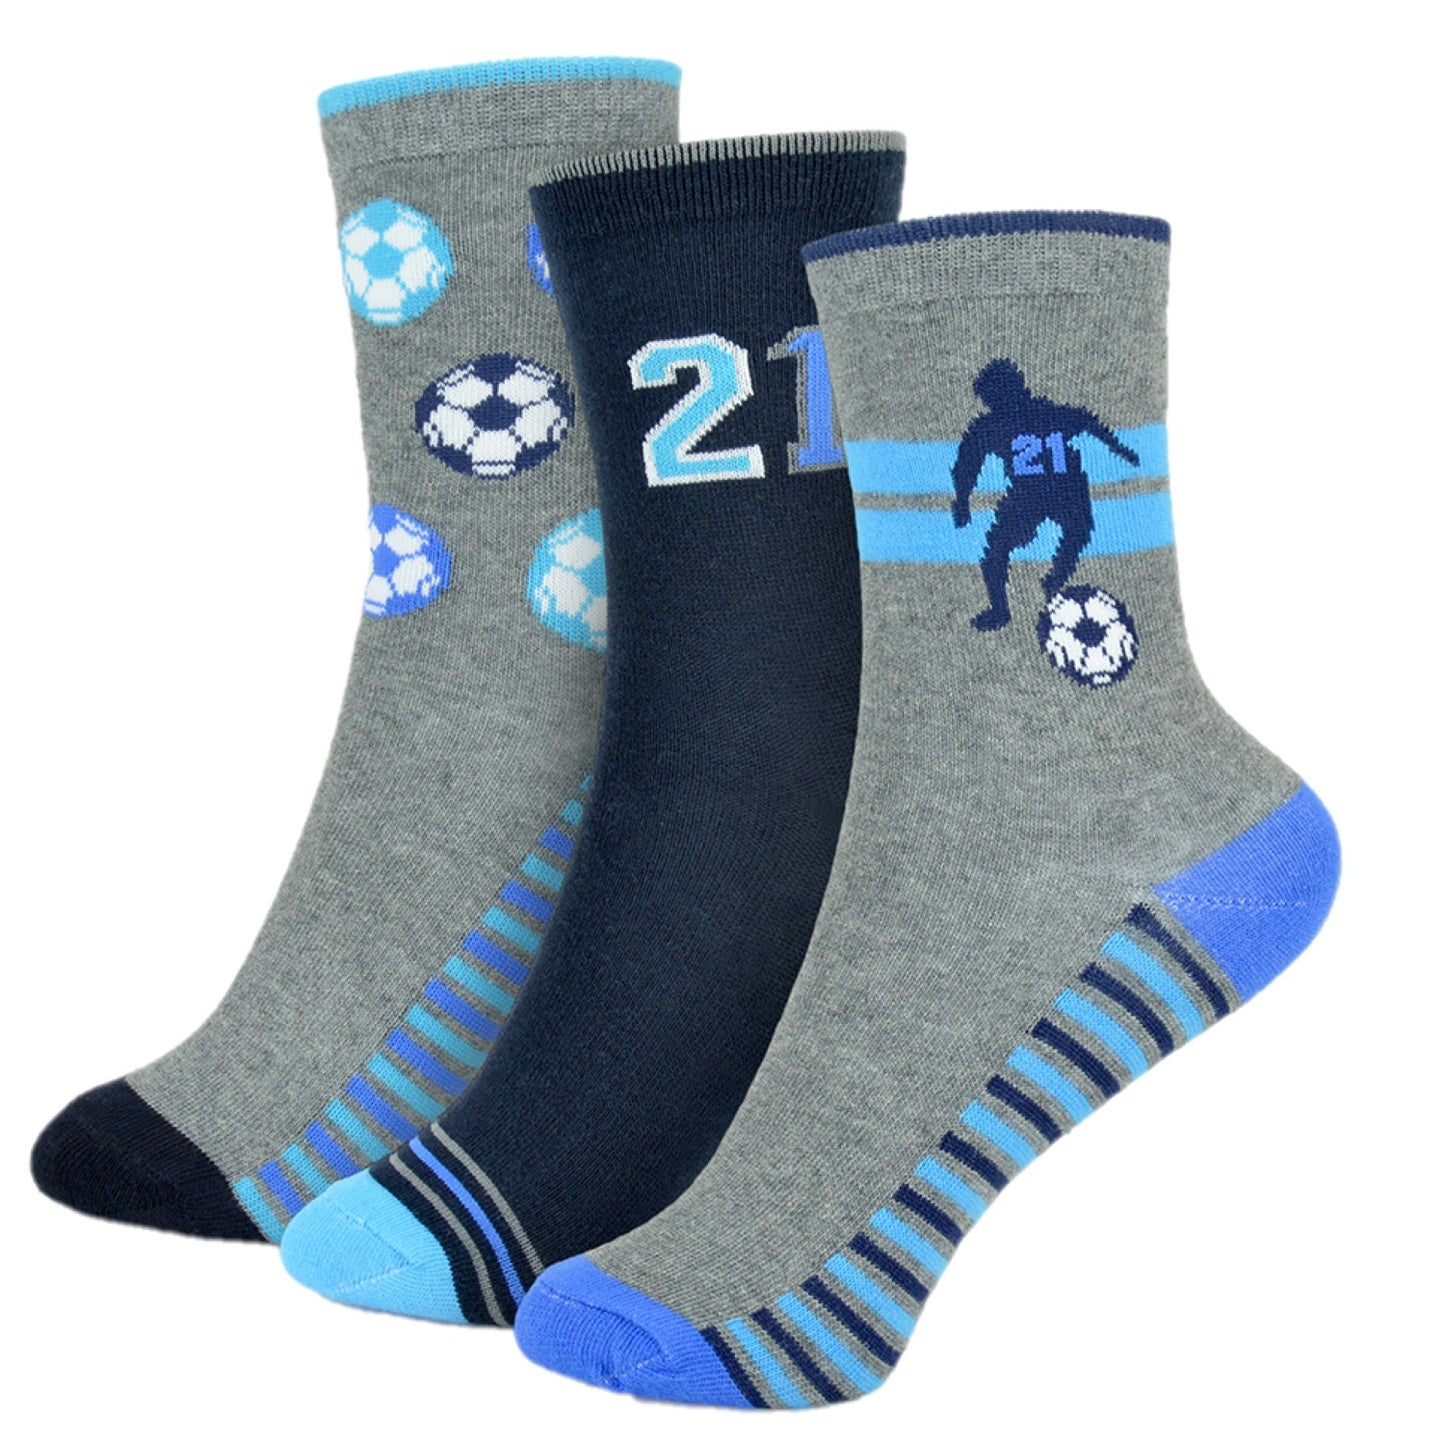 Boys Football Patterned Cotton-Rich Multicoloured Ankle Socks - 6 Pairs